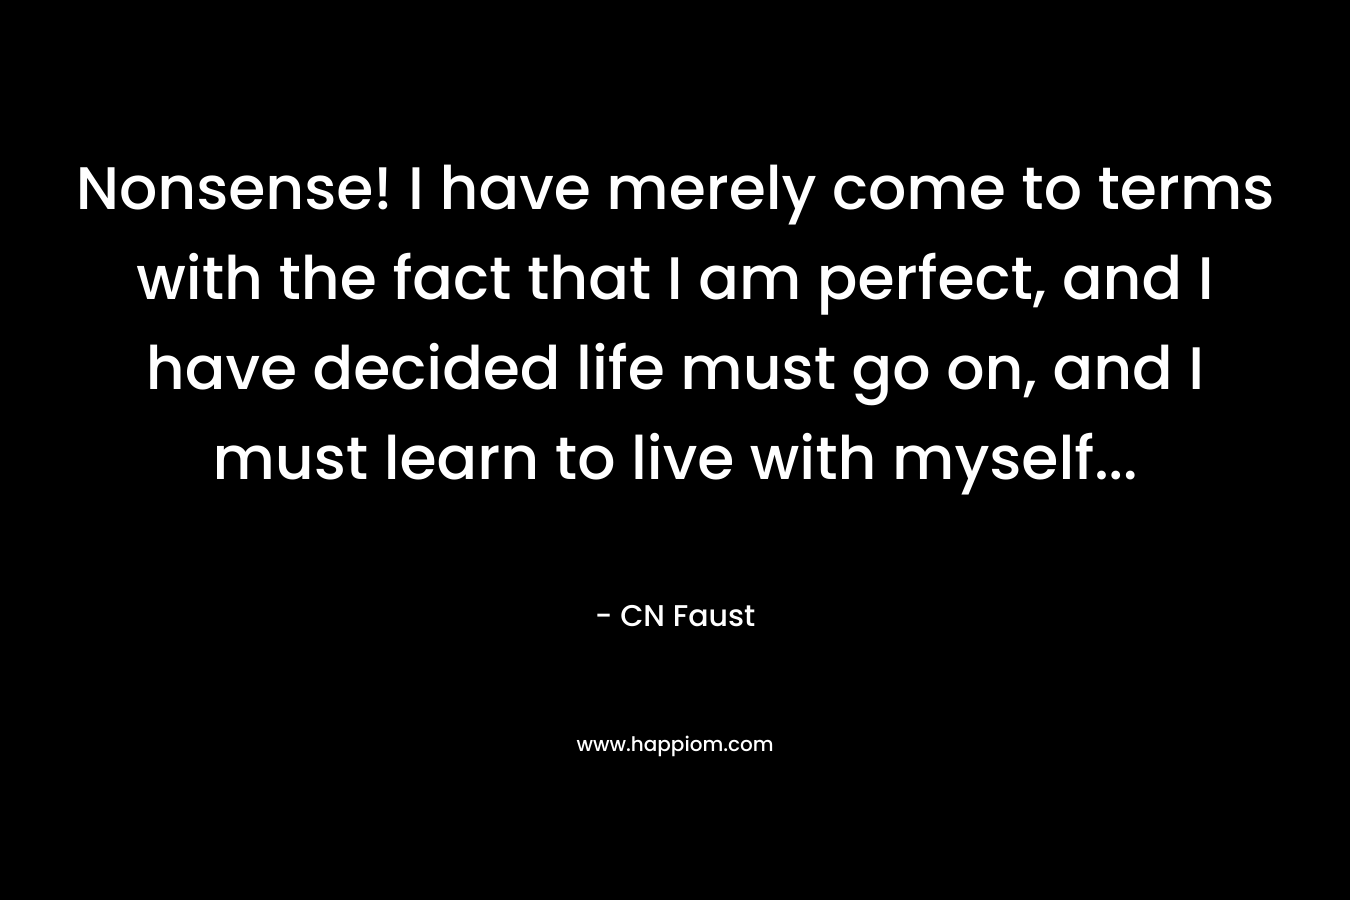 Nonsense! I have merely come to terms with the fact that I am perfect, and I have decided life must go on, and I must learn to live with myself… – CN Faust